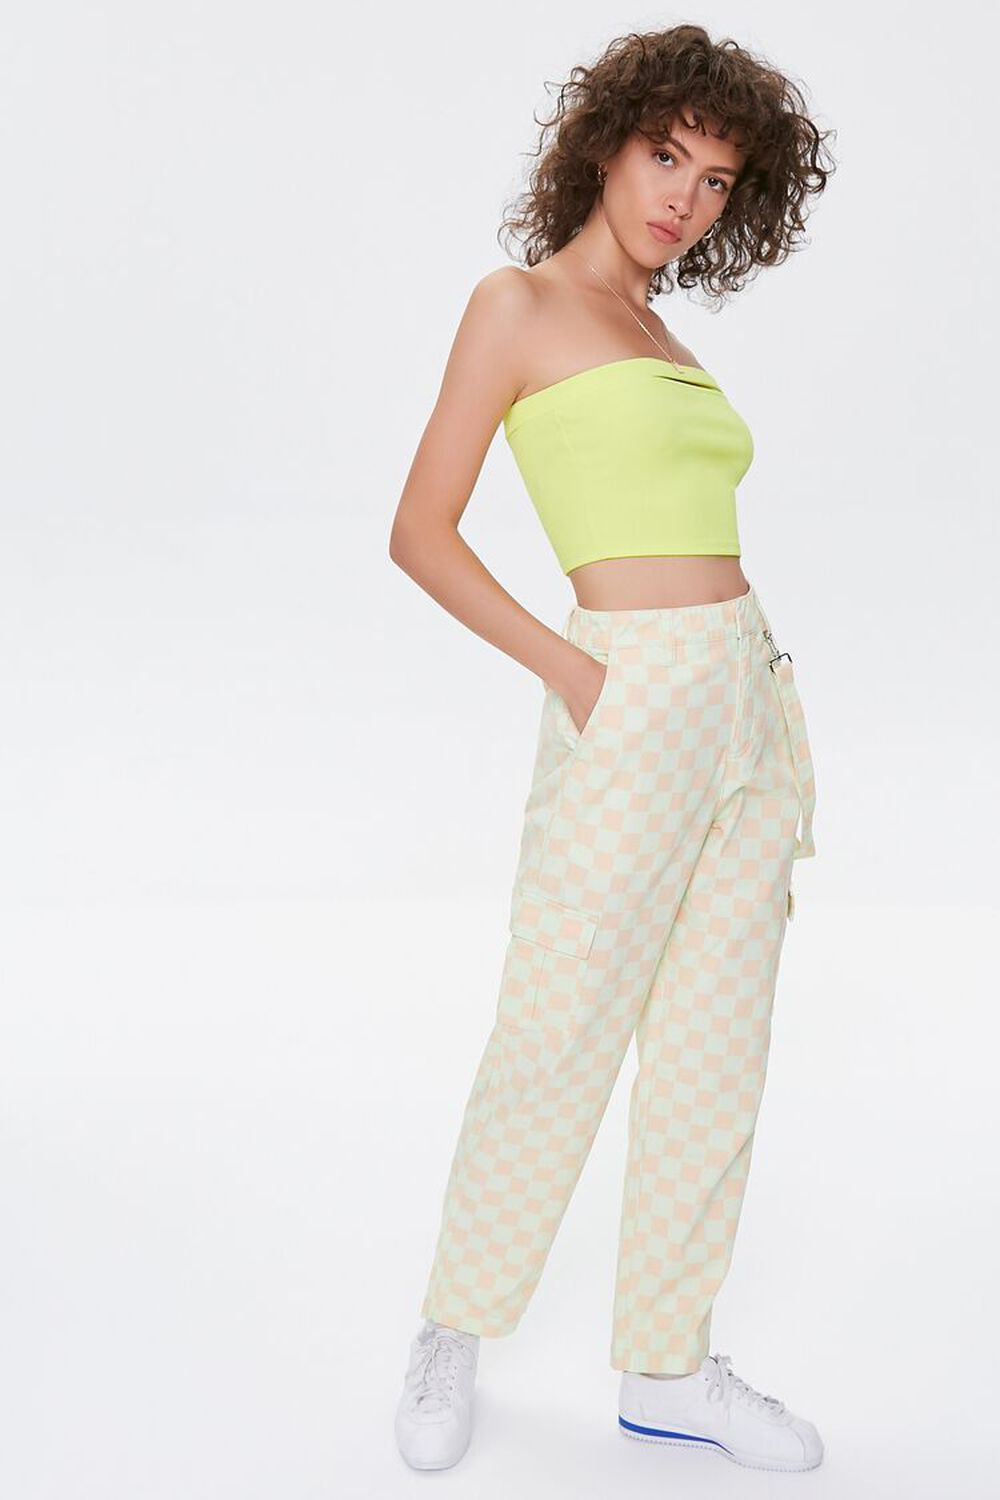 LIME/PEACH  Checkered Cargo Pants, image 1